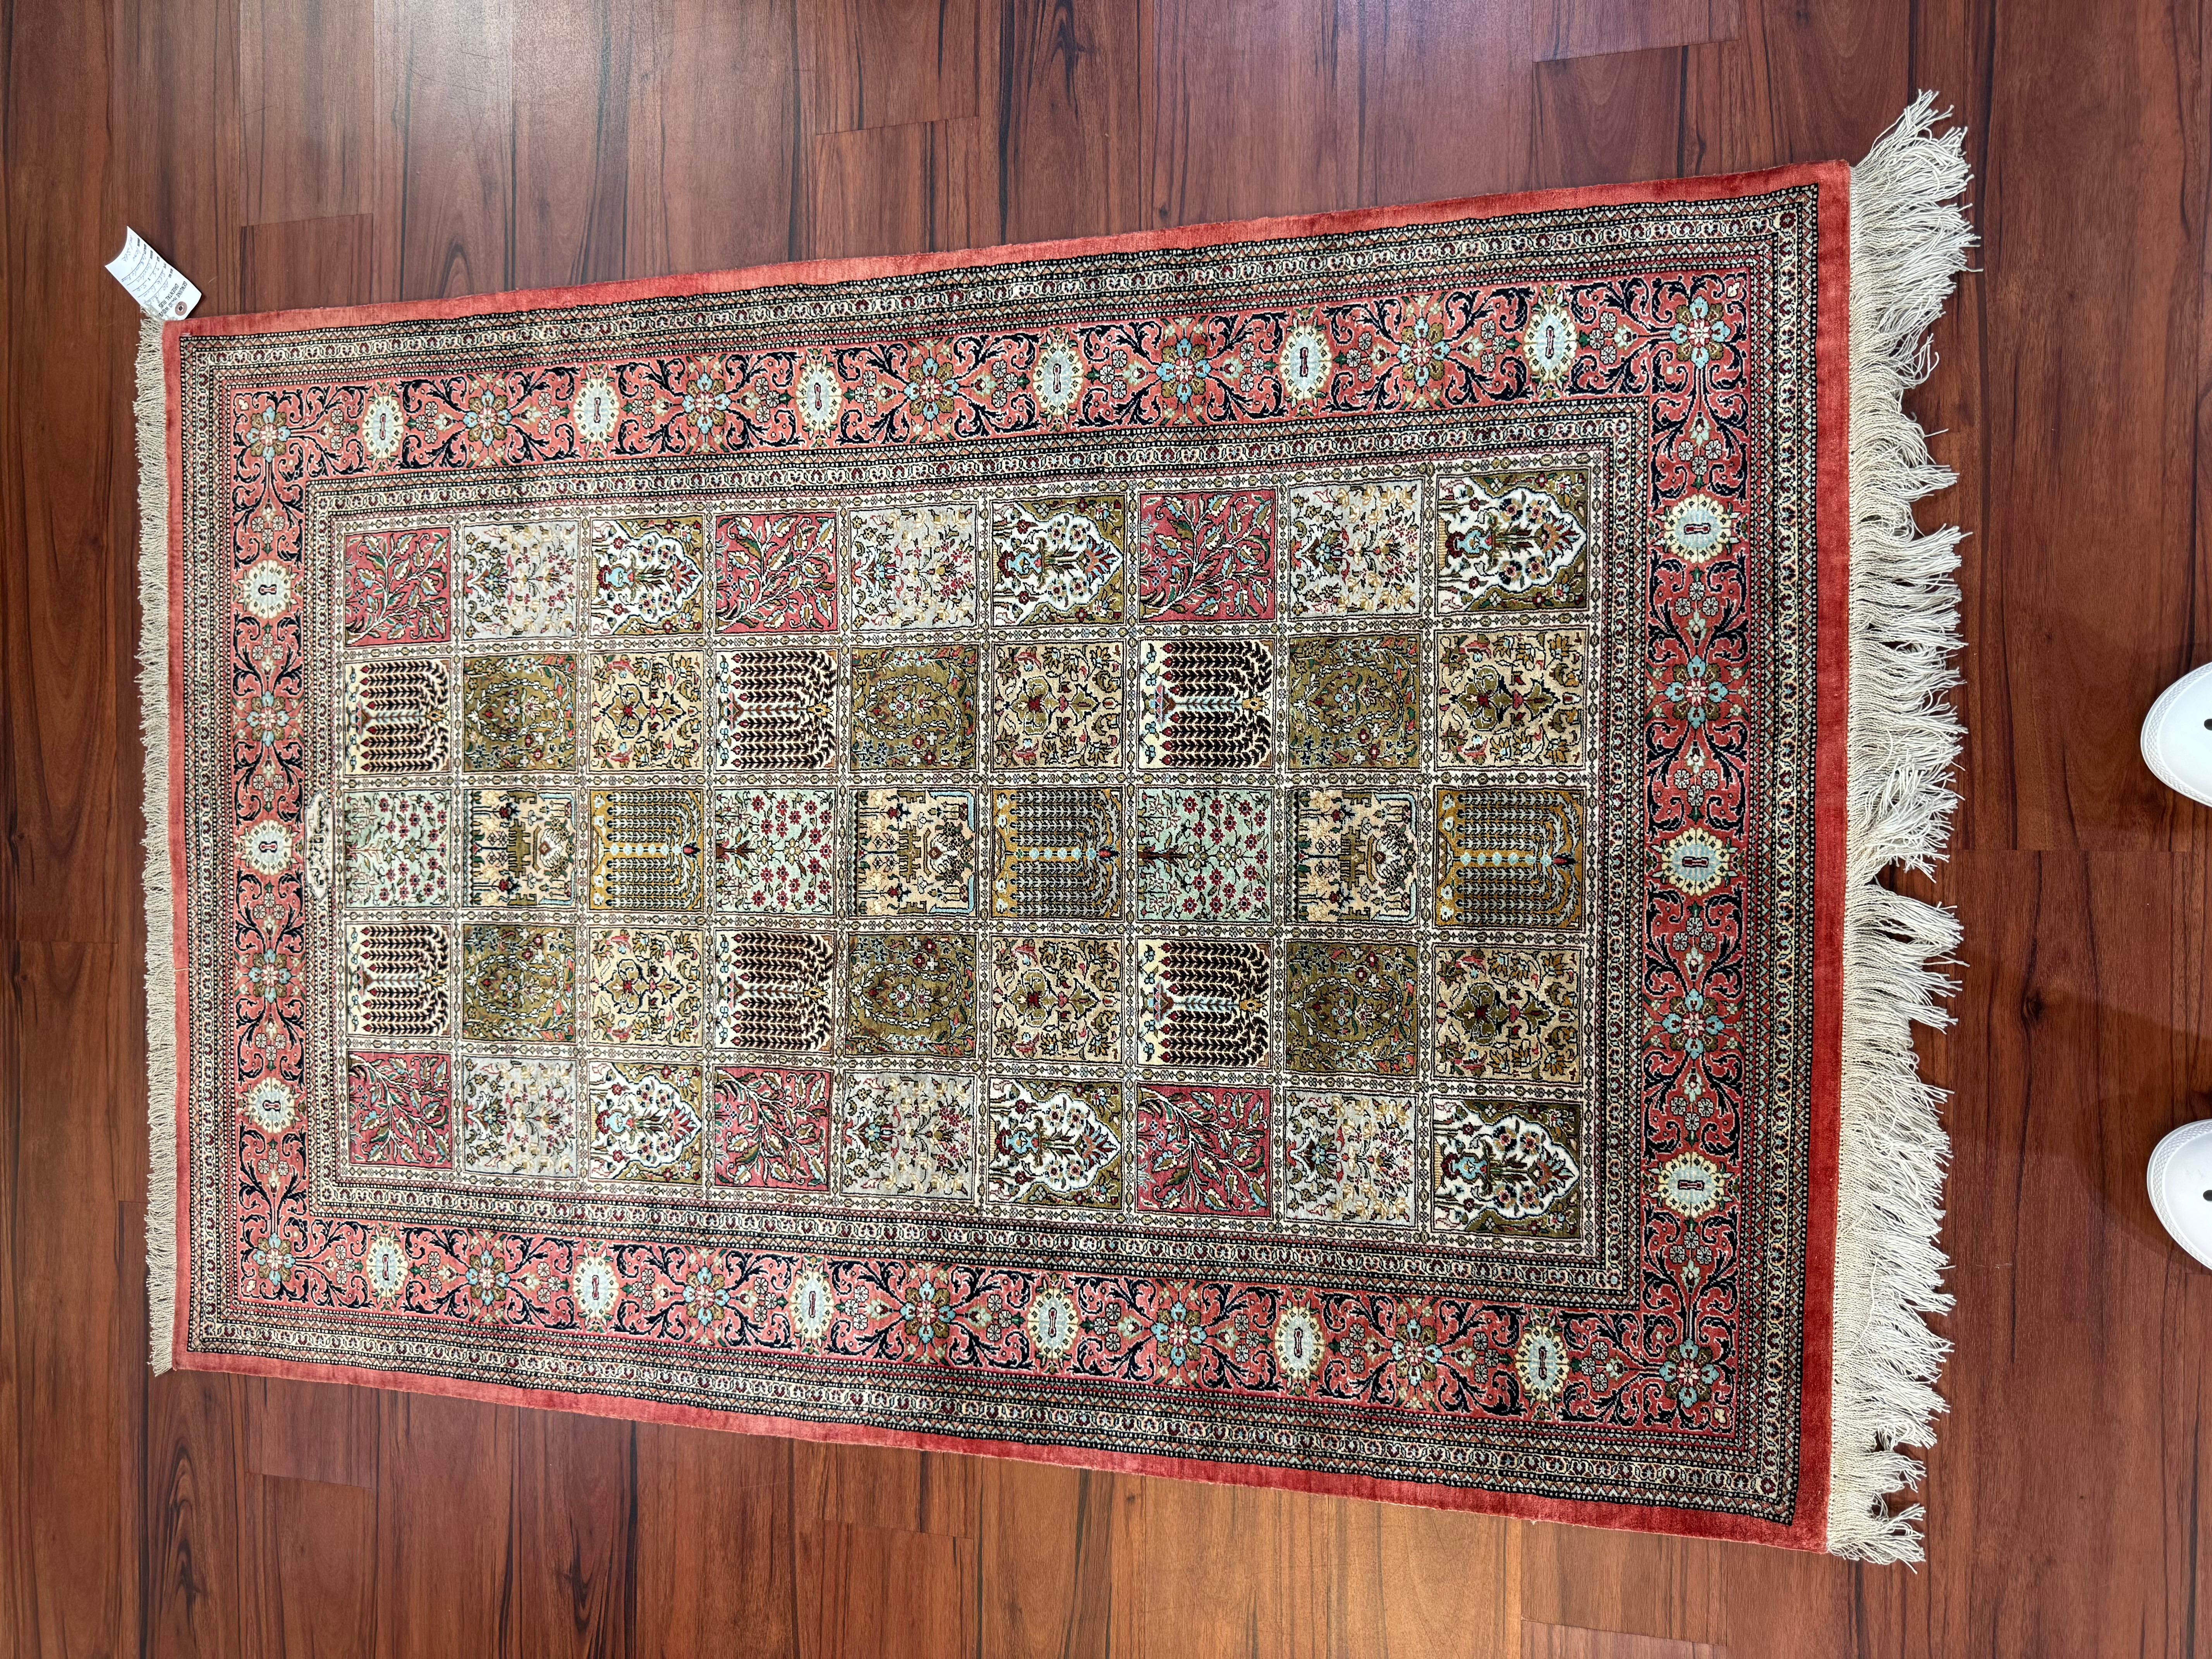 A stunning very fine Persian Silk Qum Rug that originates from Iran in the late 20th century. This rug is in excellent condition considering its rich history and is made from 100% silk. Feel free to message me in regards to this listing or any other